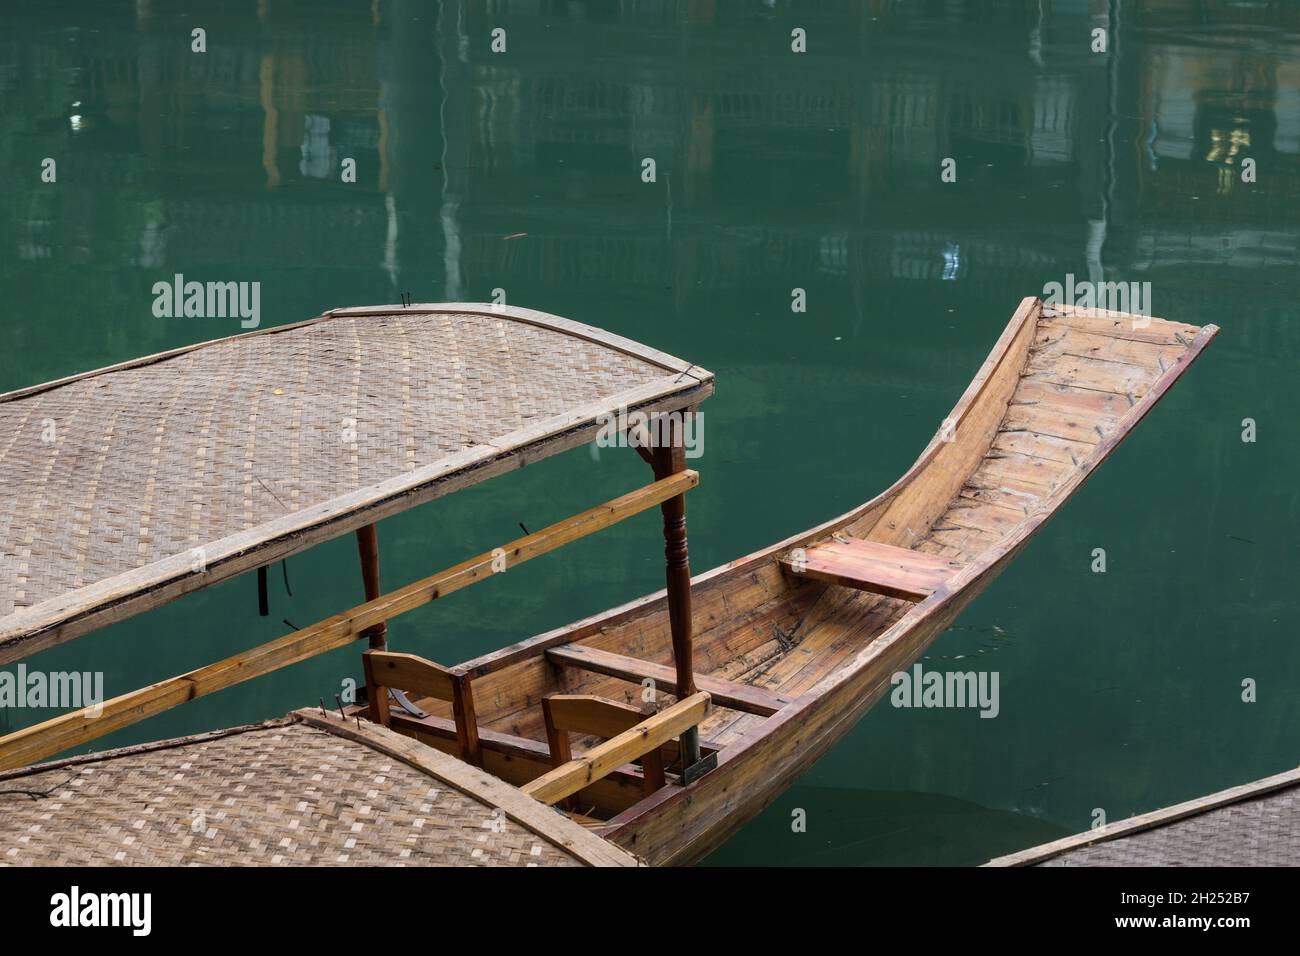 A covered tour boat docked on the bank of the Tuojiang River in Fenghuang, China. Stock Photo